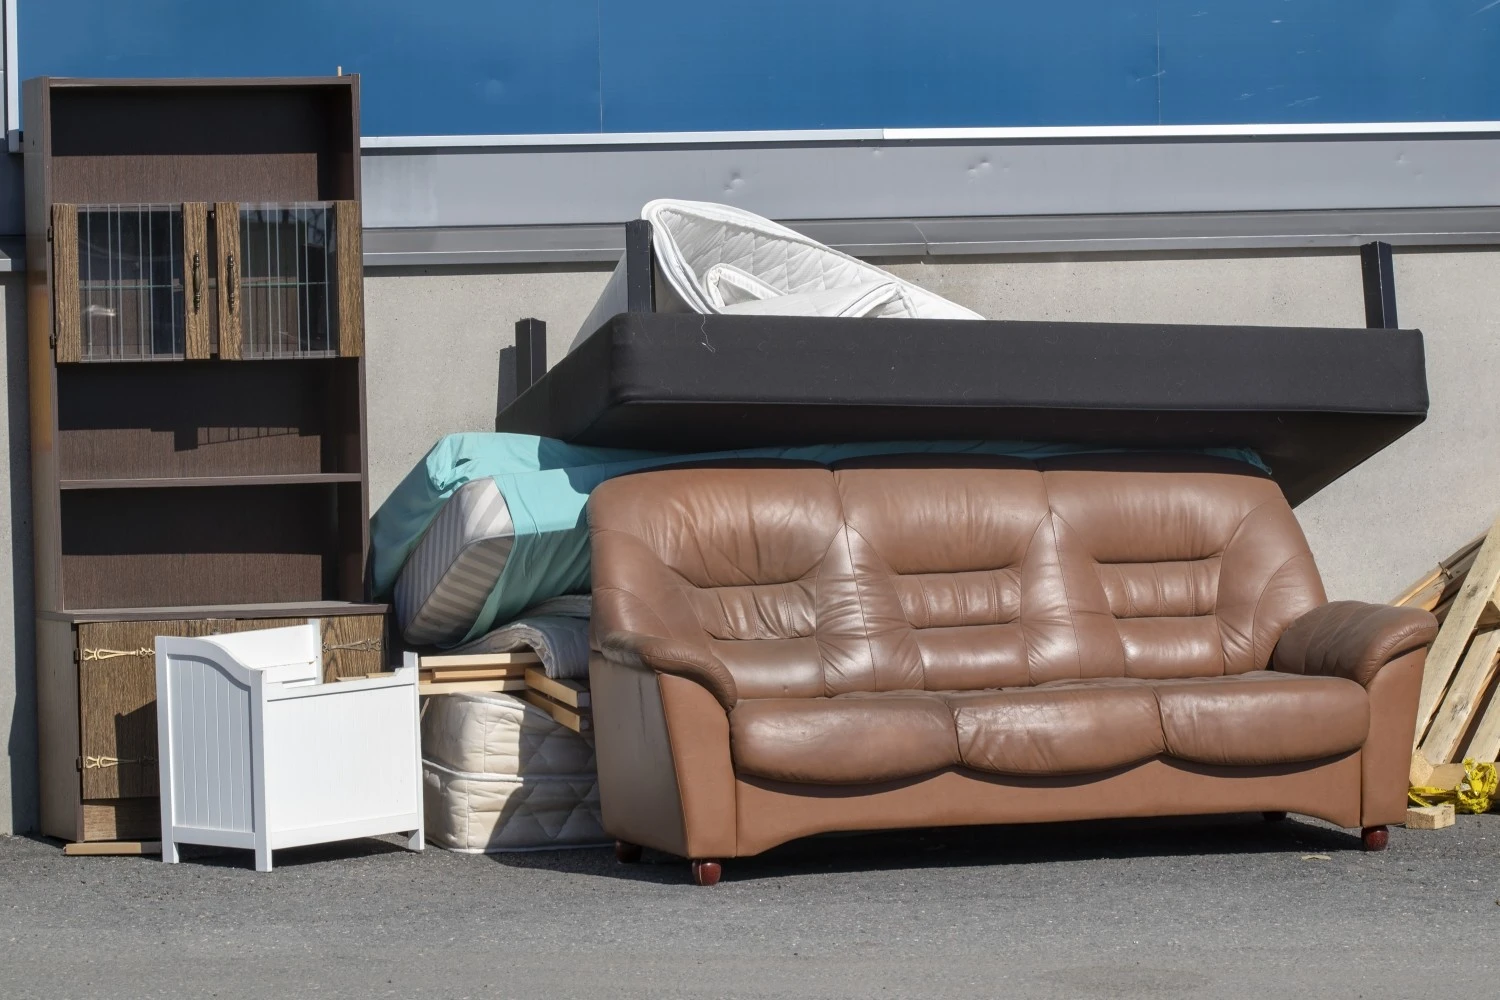 Where to Donate Furniture in Singapore